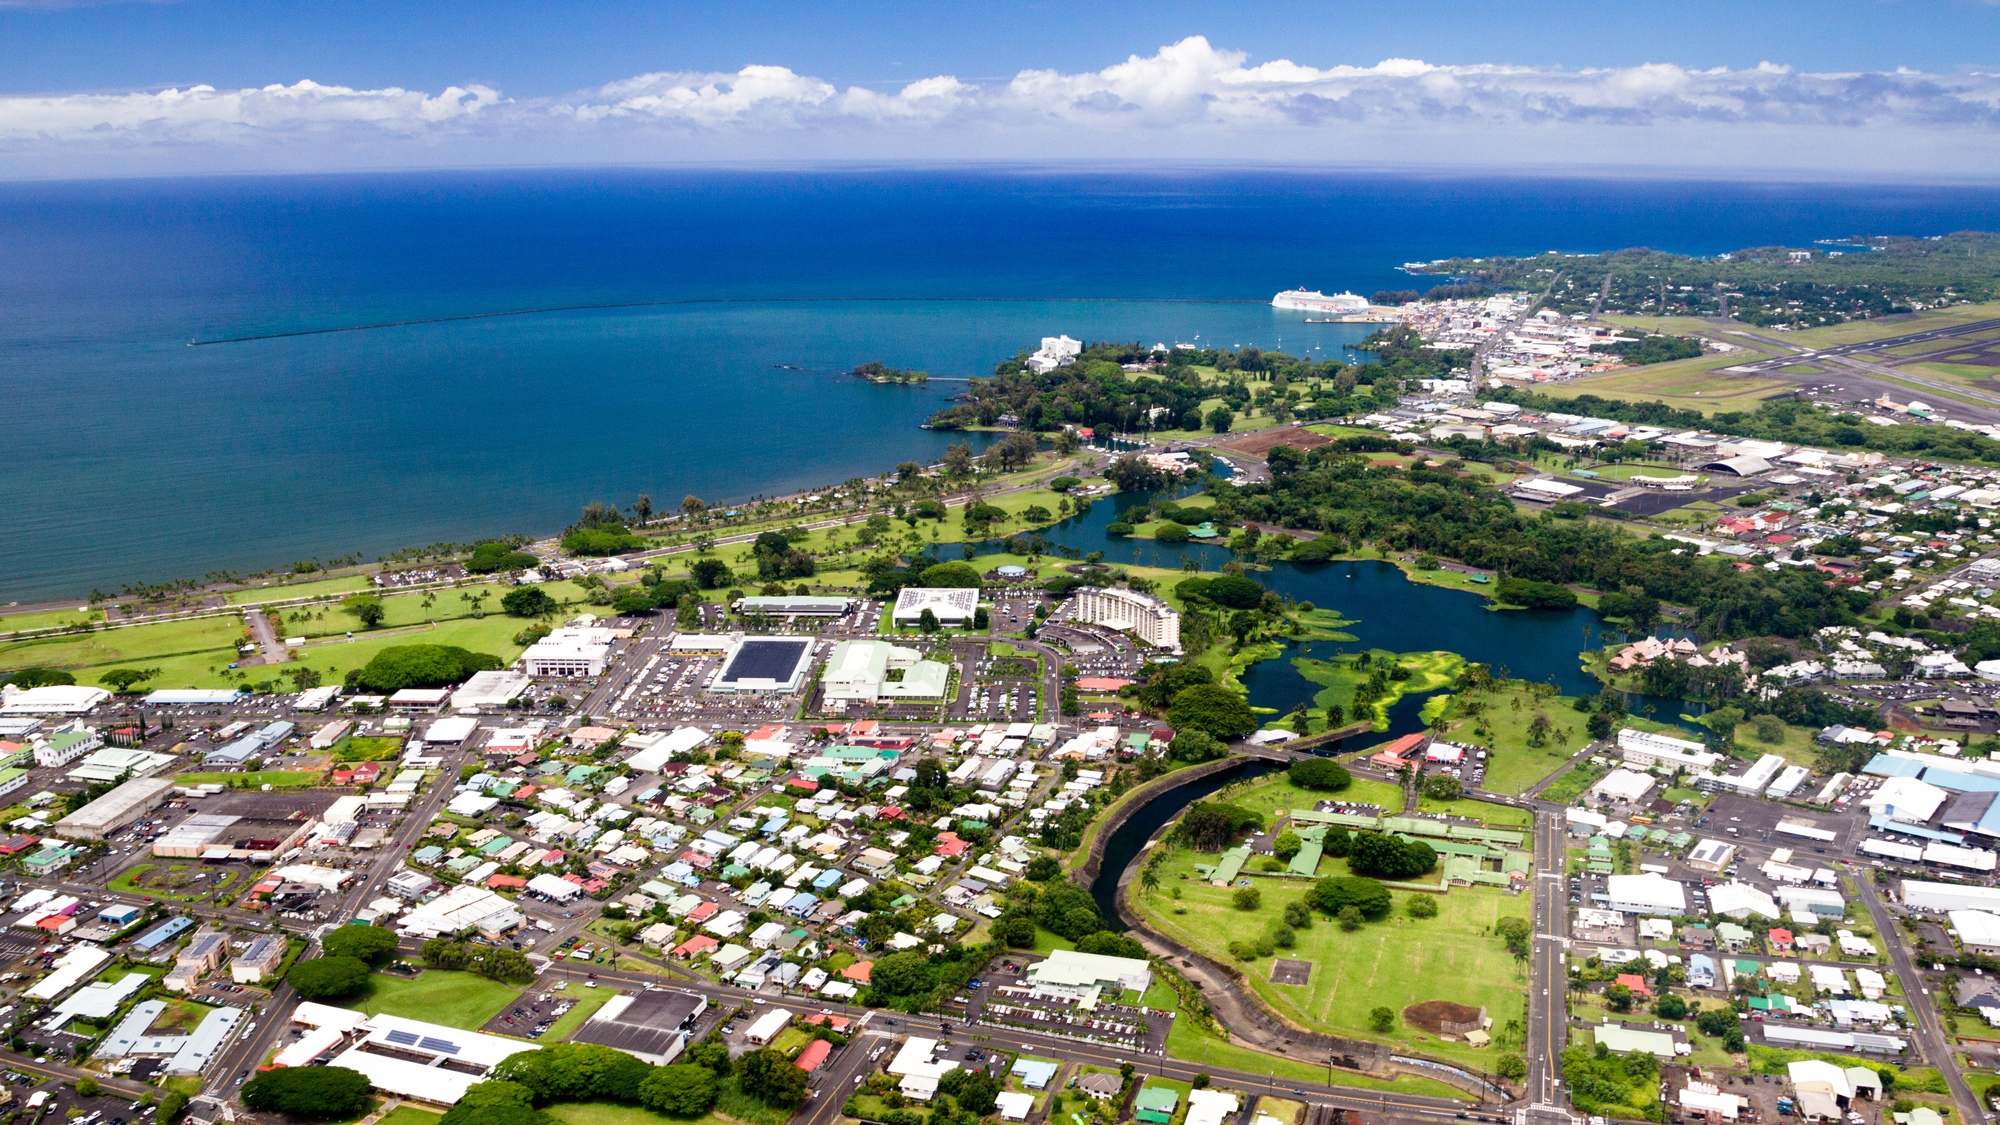 County of Hawai’i Department of Water Supply Water Master Plan and Rate Study Update